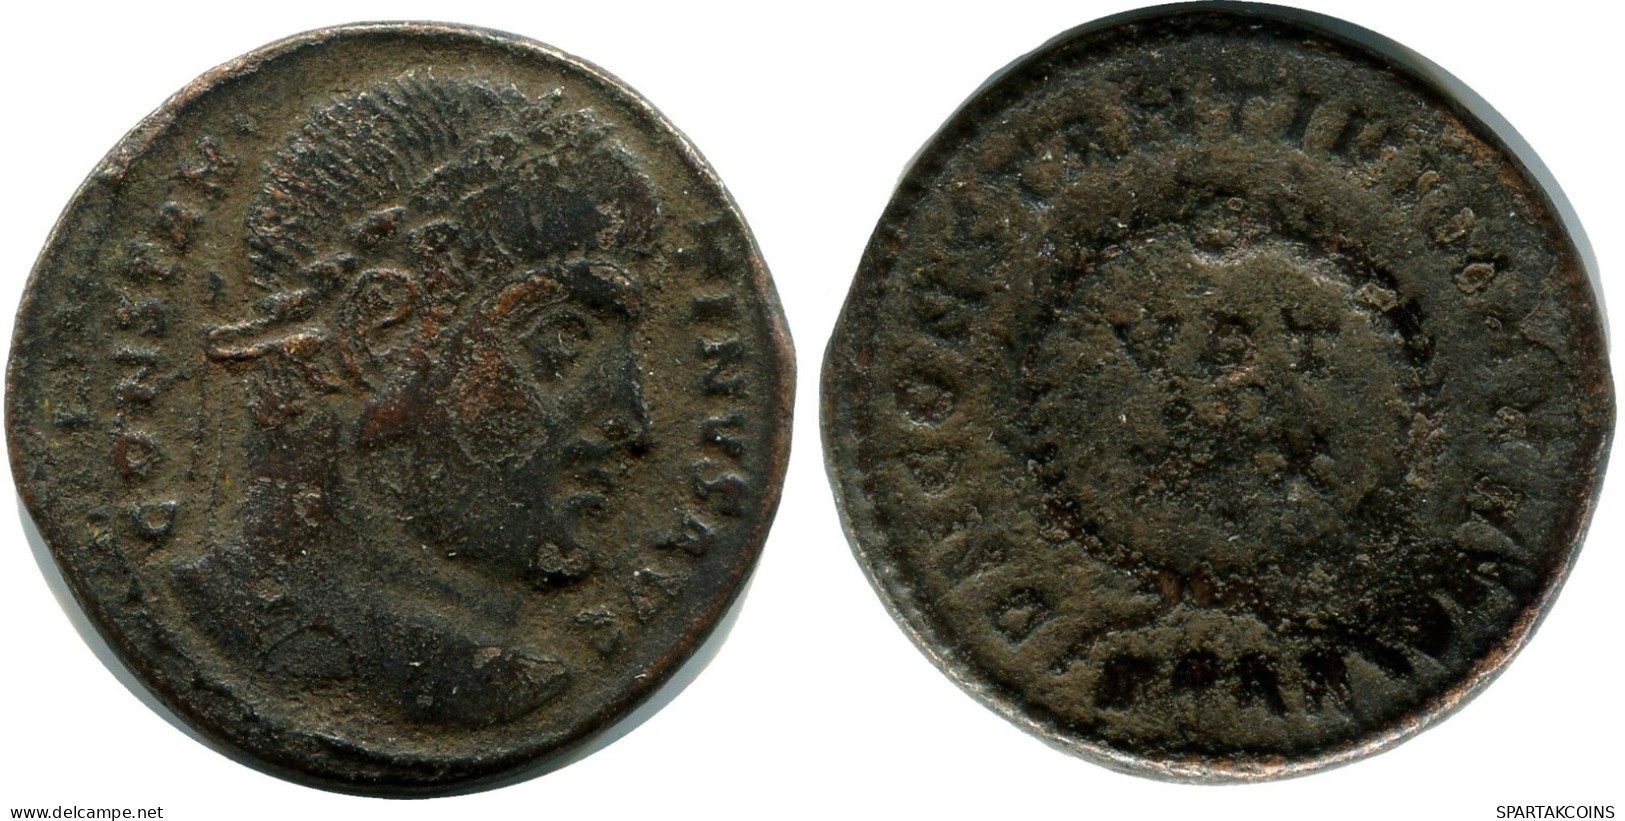 CONSTANTINE I MINTED IN HERACLEA FOUND IN IHNASYAH HOARD EGYPT #ANC11216.14.U.A - The Christian Empire (307 AD Tot 363 AD)